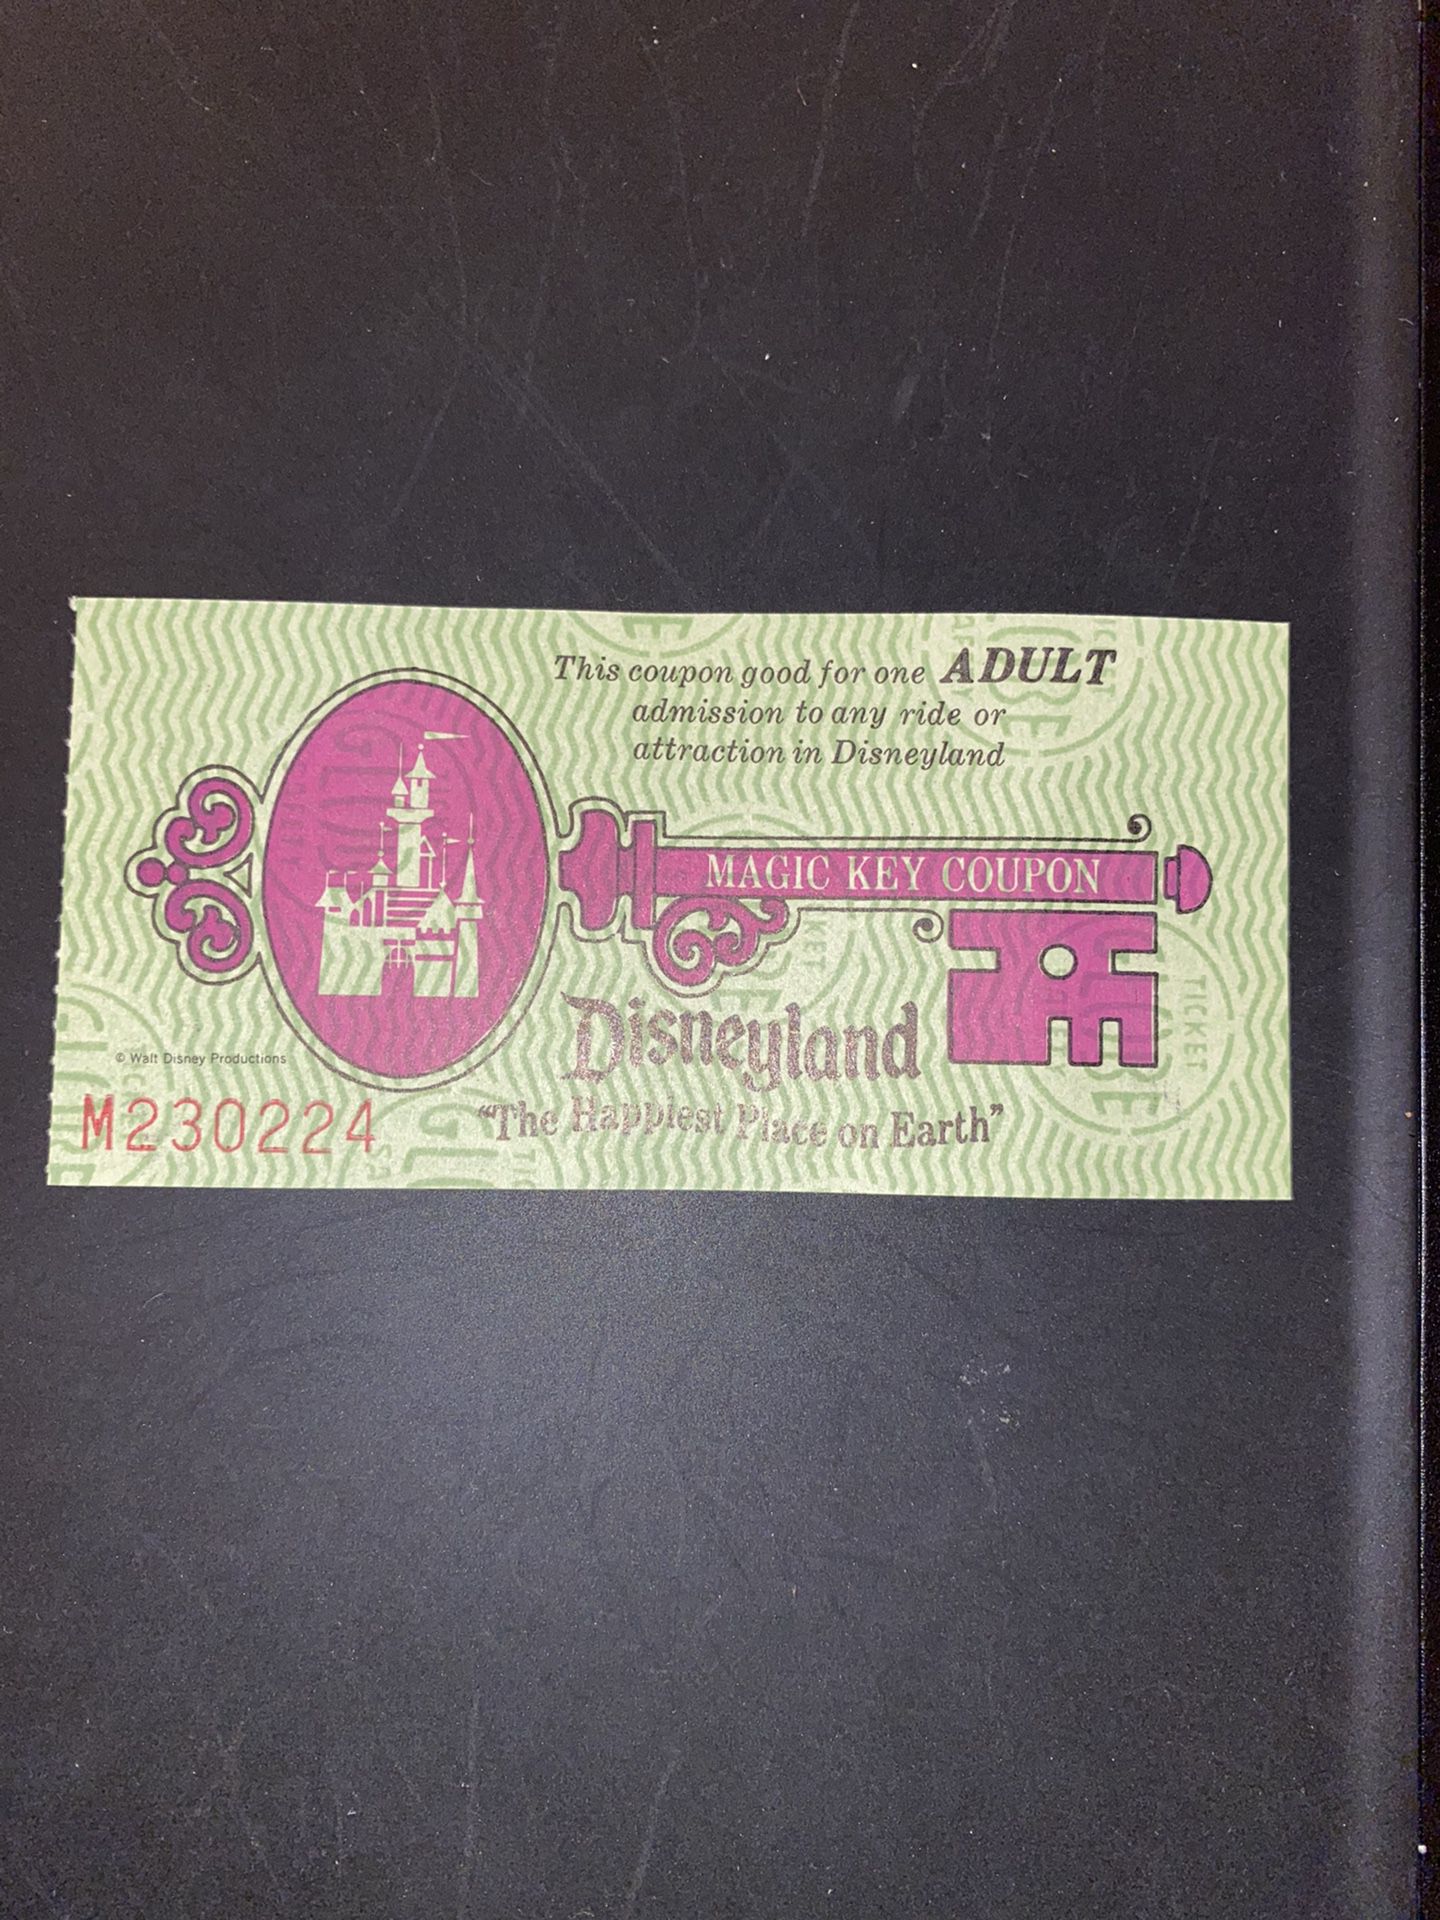 1970 ‘s adult admission ticket for one ride at Disneyland